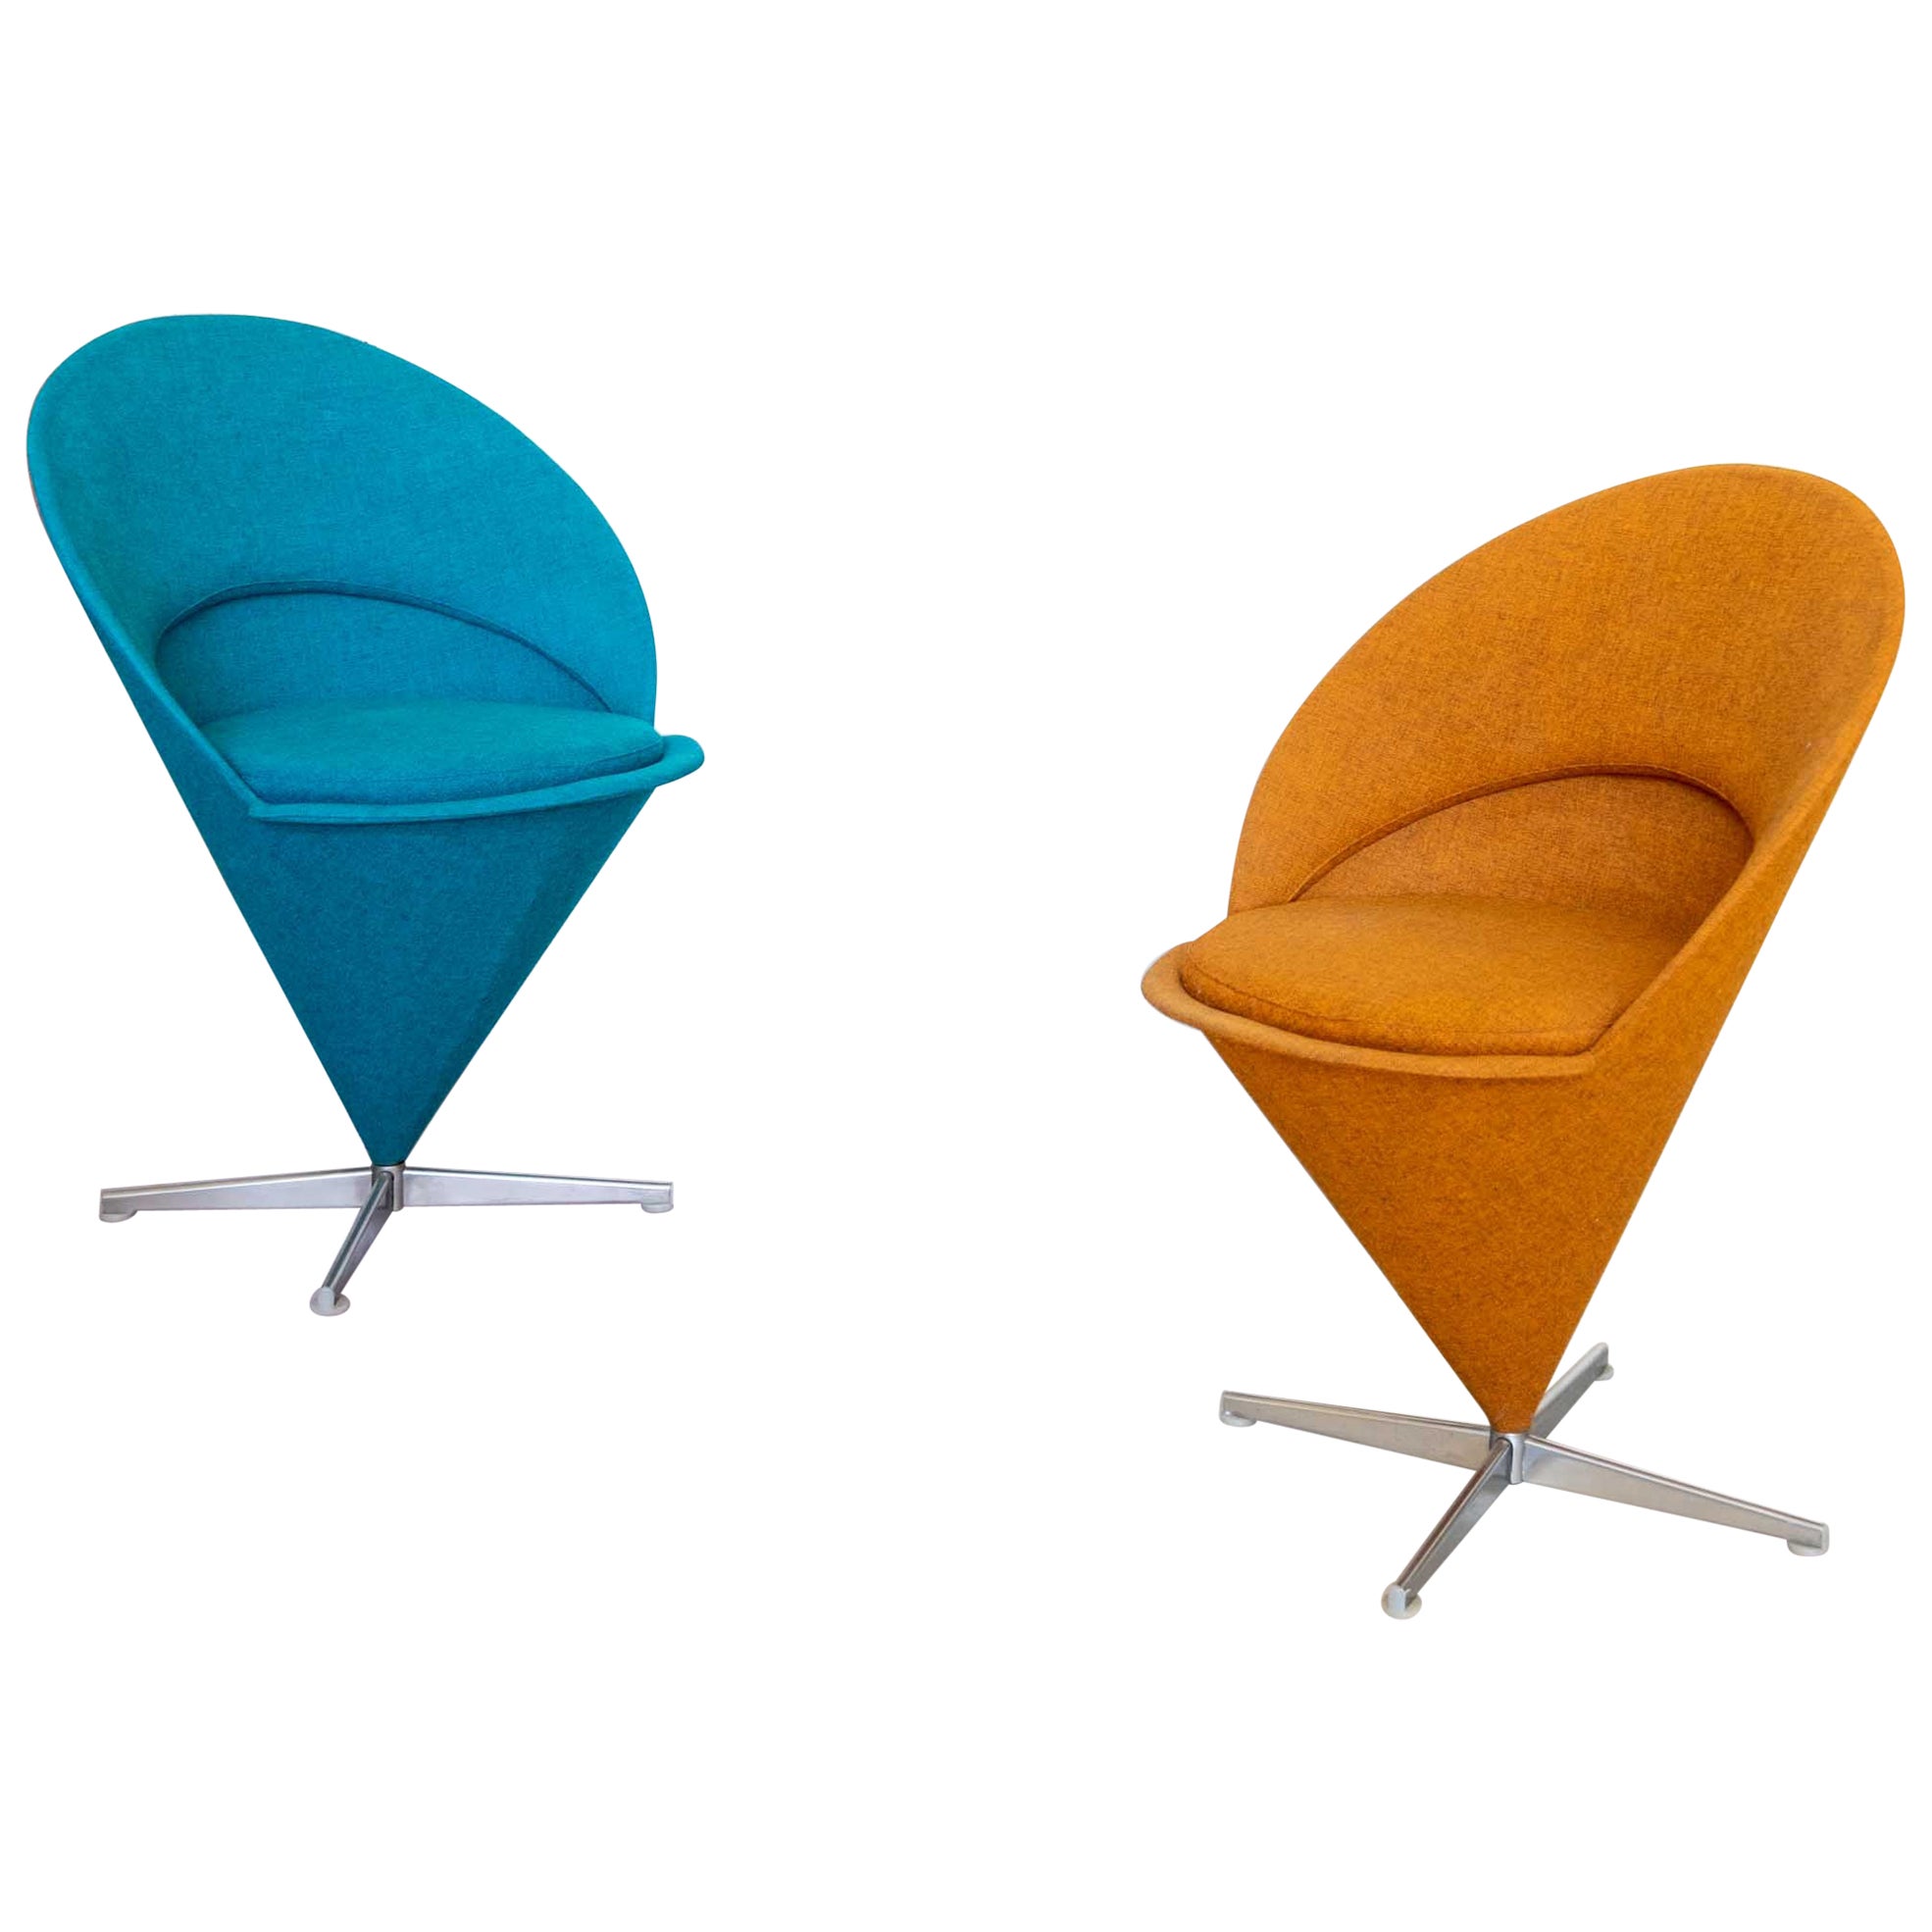 Verner Panton "Cone" Chairs in Blue and Orange, 20th Century